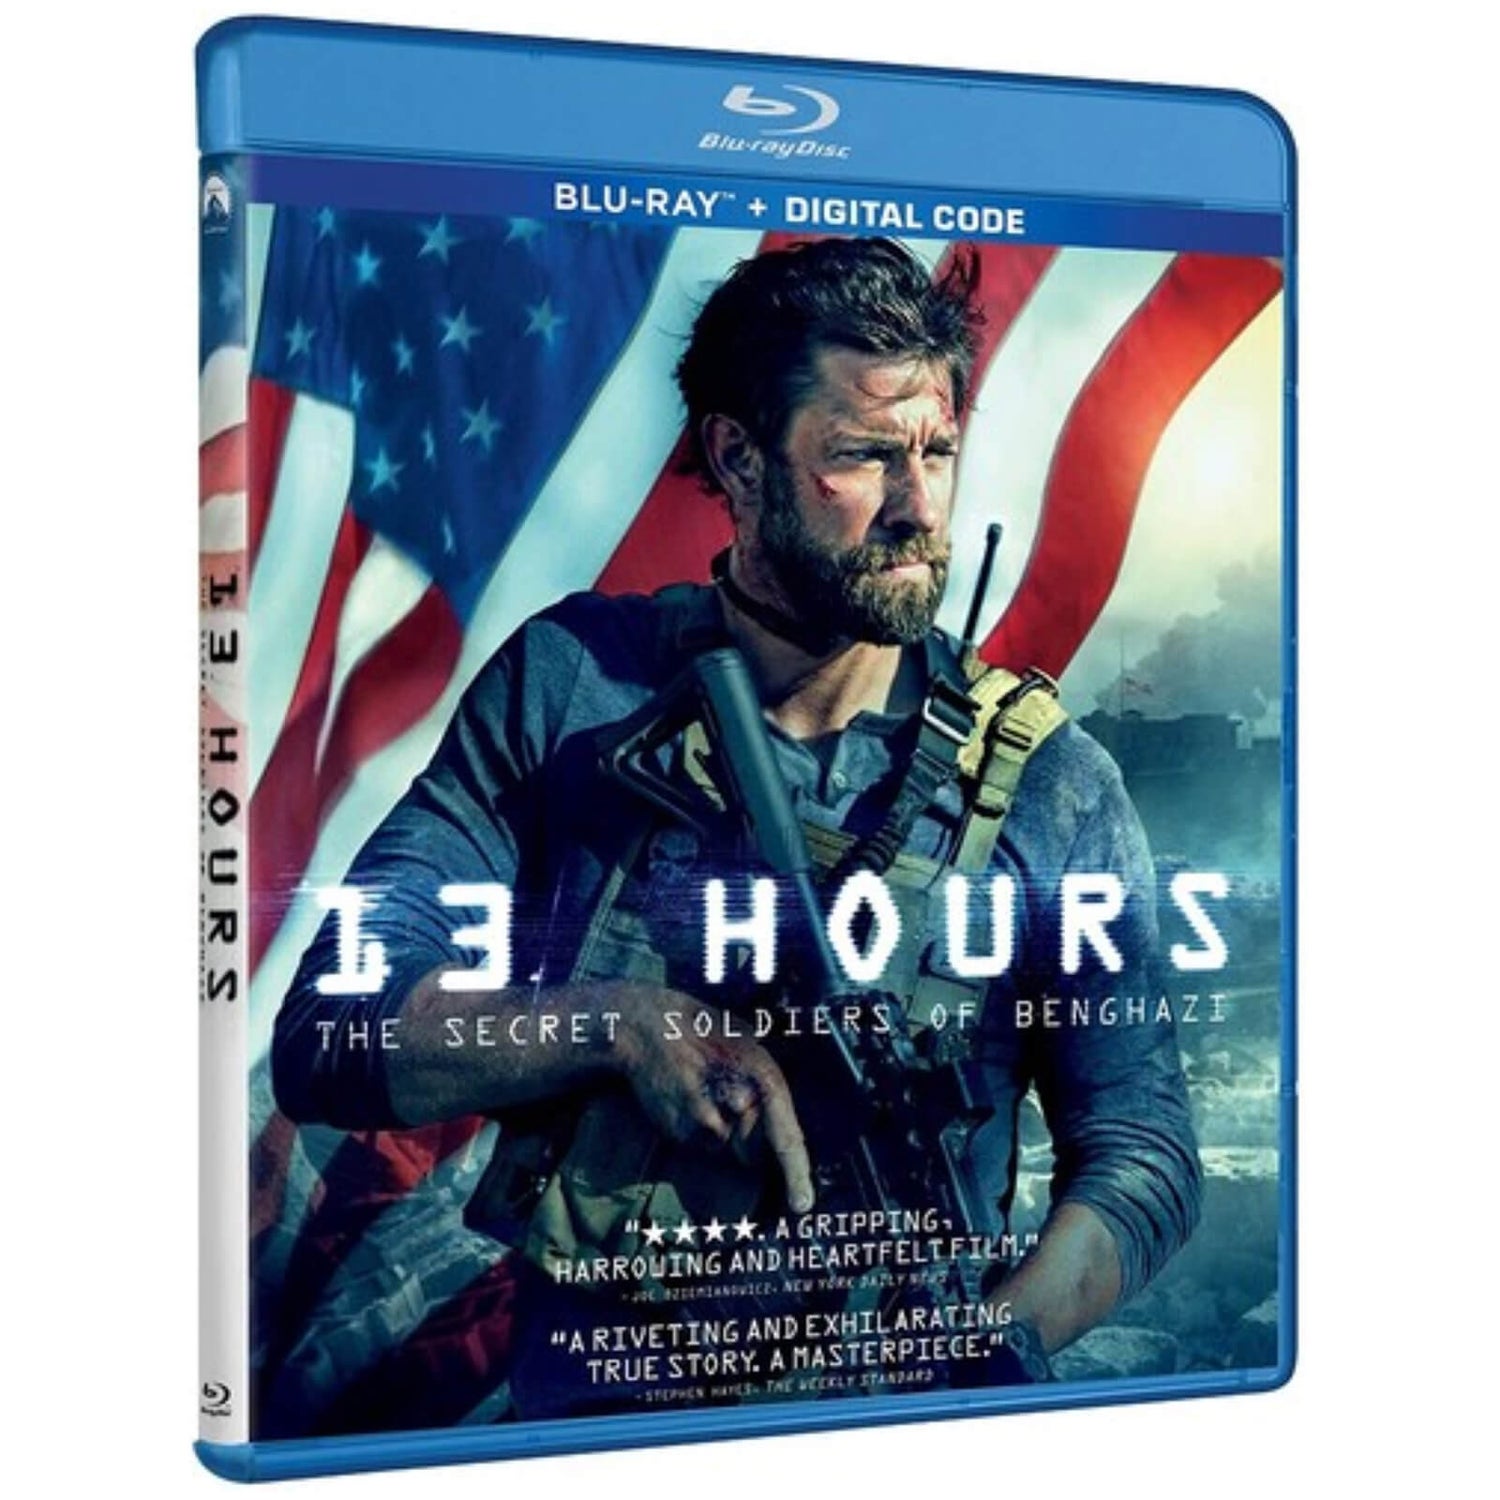 13 Hours: The Secret Soldiers of Benghazi (US Import)